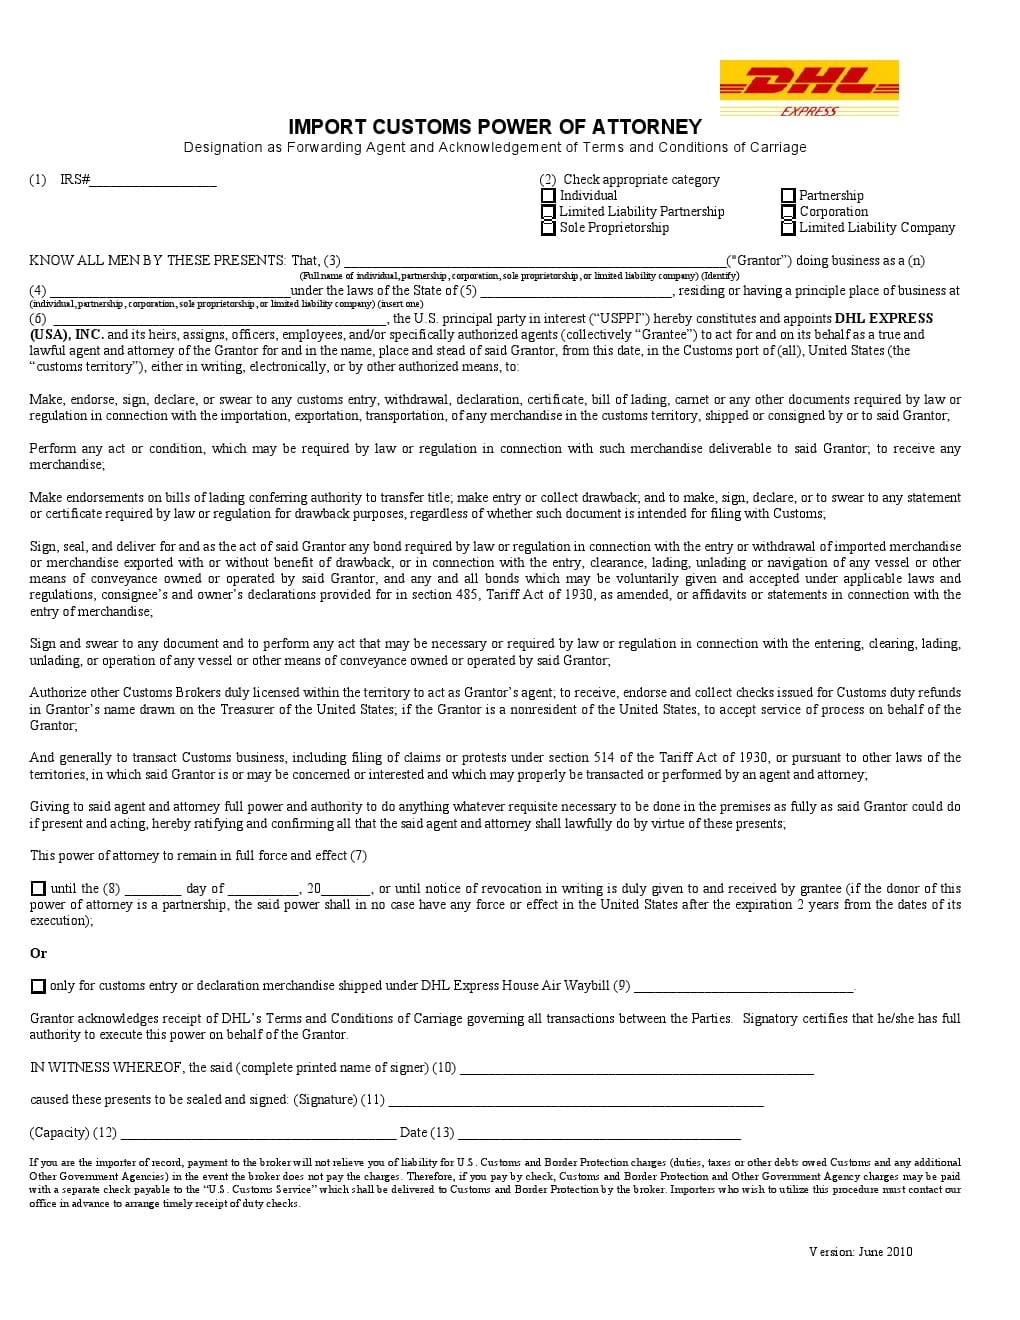 Free Customs Power of Attorney Forms